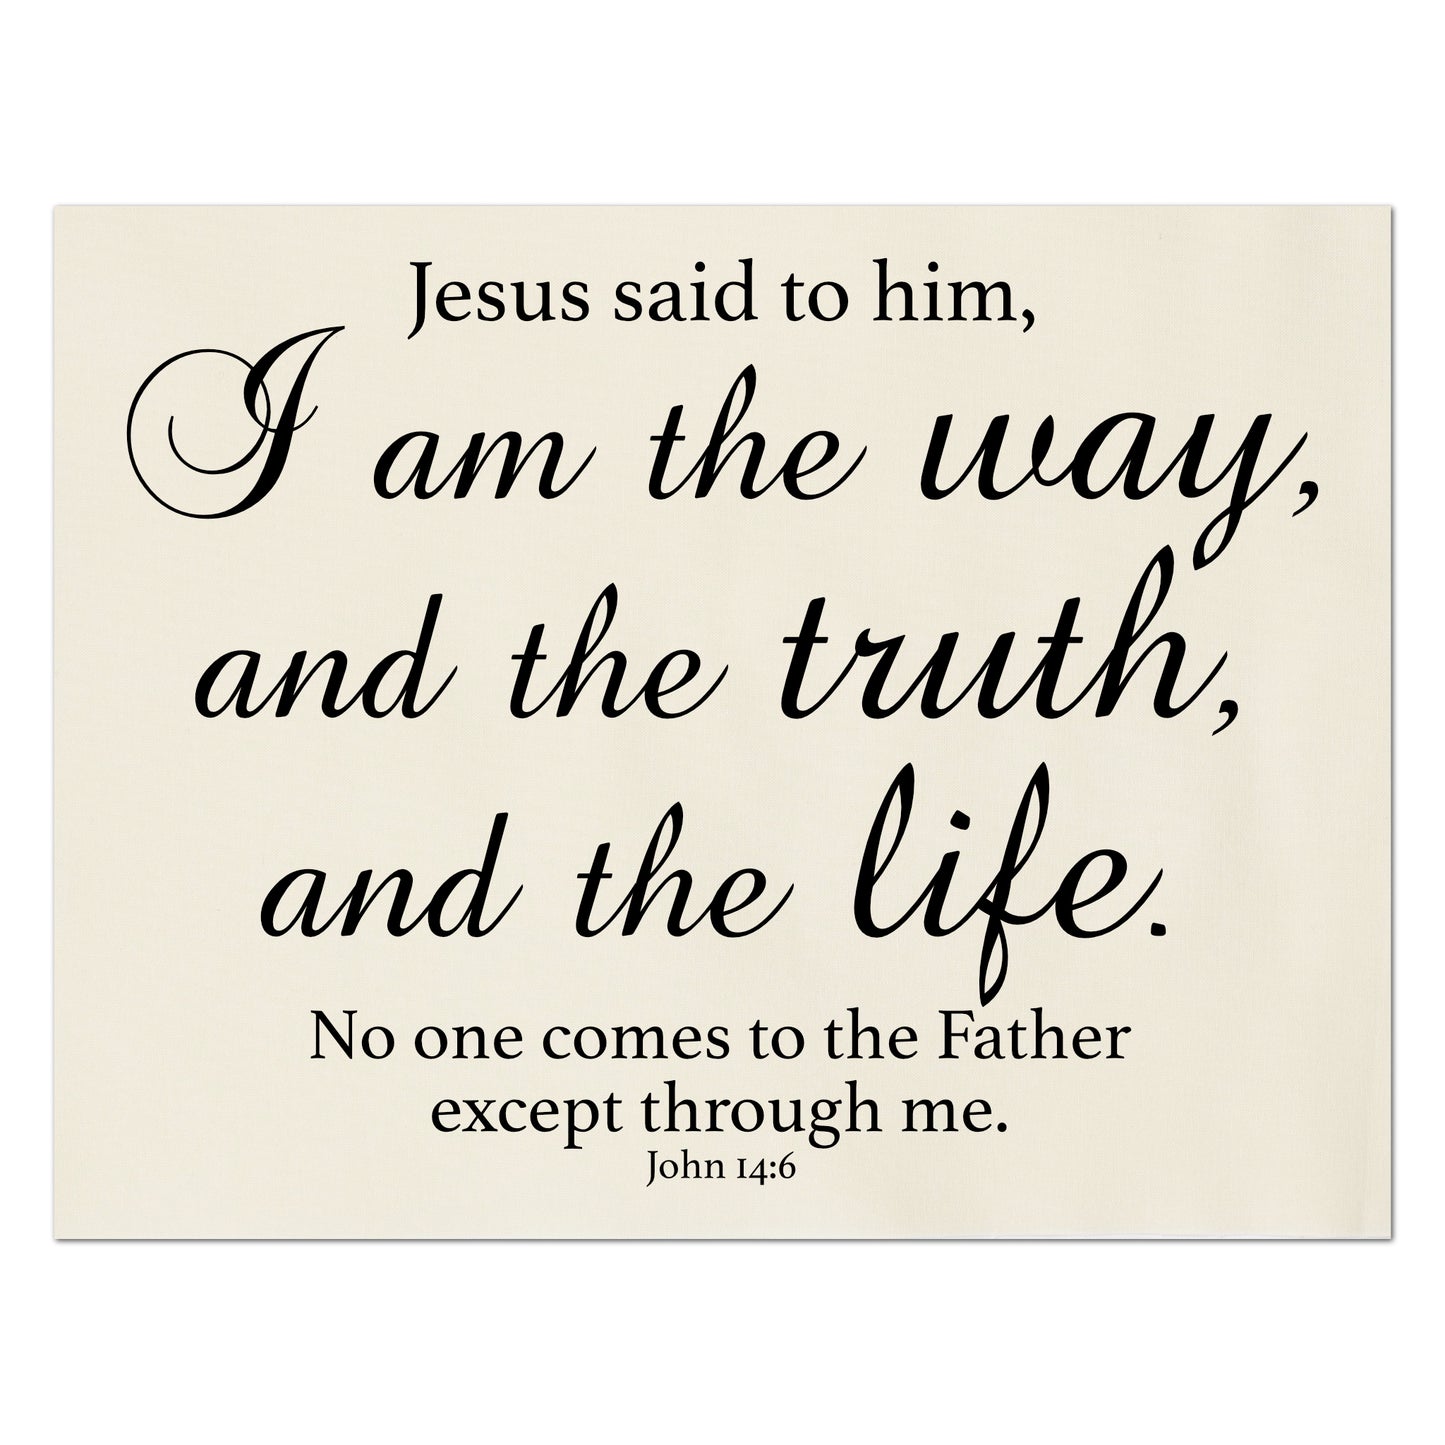 Jesus said to him, I am the way and the truth and the life.  No one comes to the Father except through me. - John 14 6 - Fabric Panel Print, Quilt Block